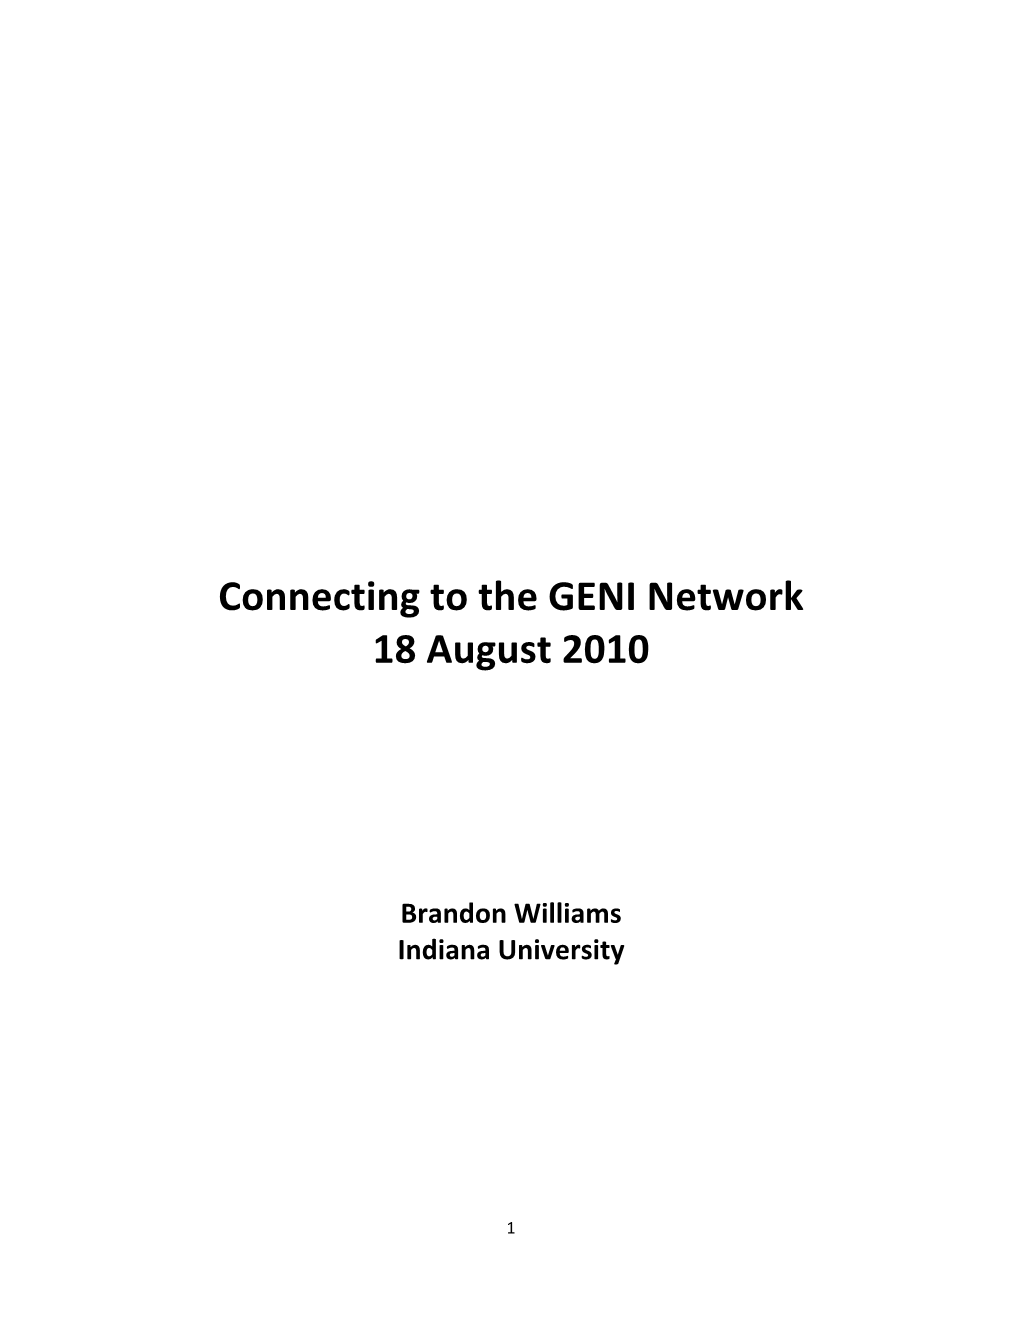 Connecting to the GENI Network 18 August 2010